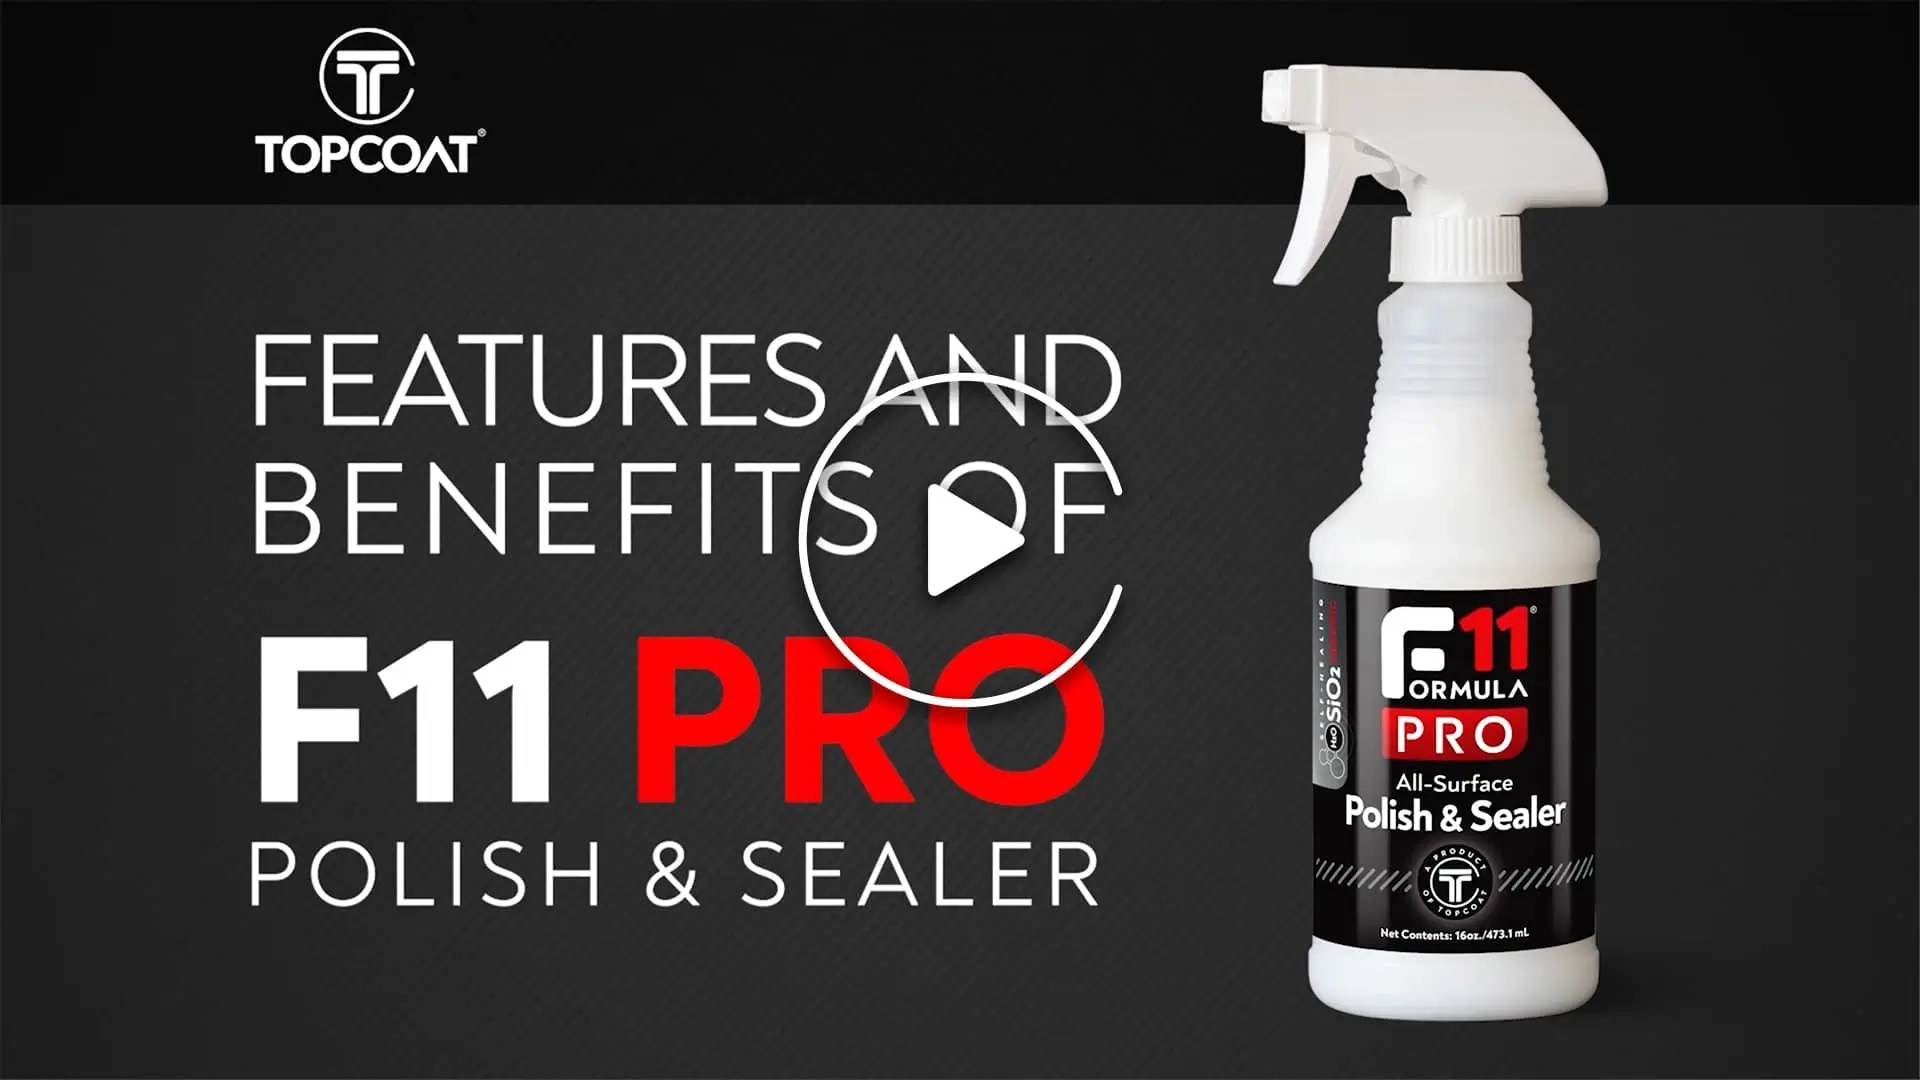 TopCoat F11 Pro Maintenance Kit reviews and specifications…